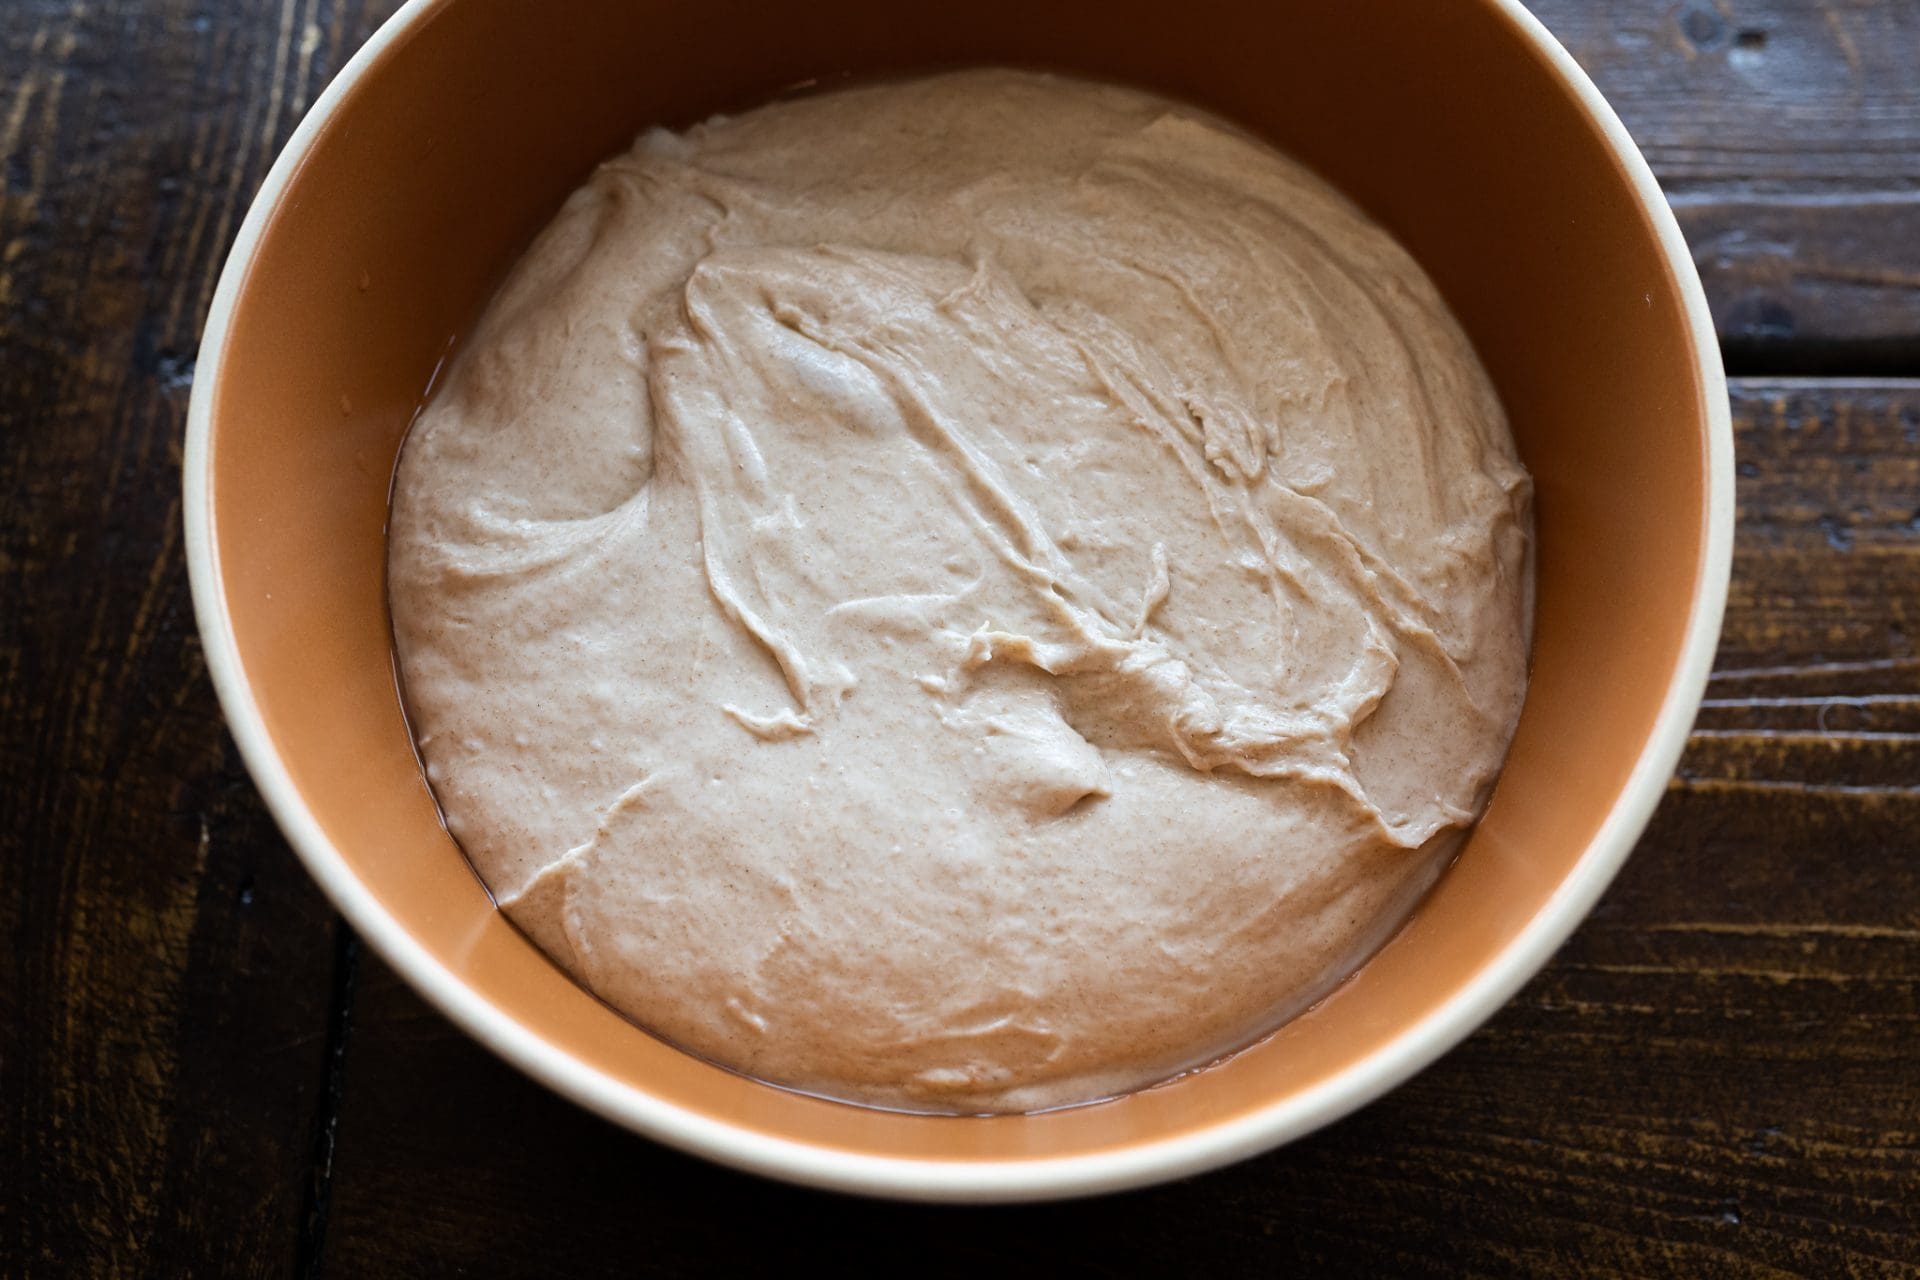 Dough at the end of mixing